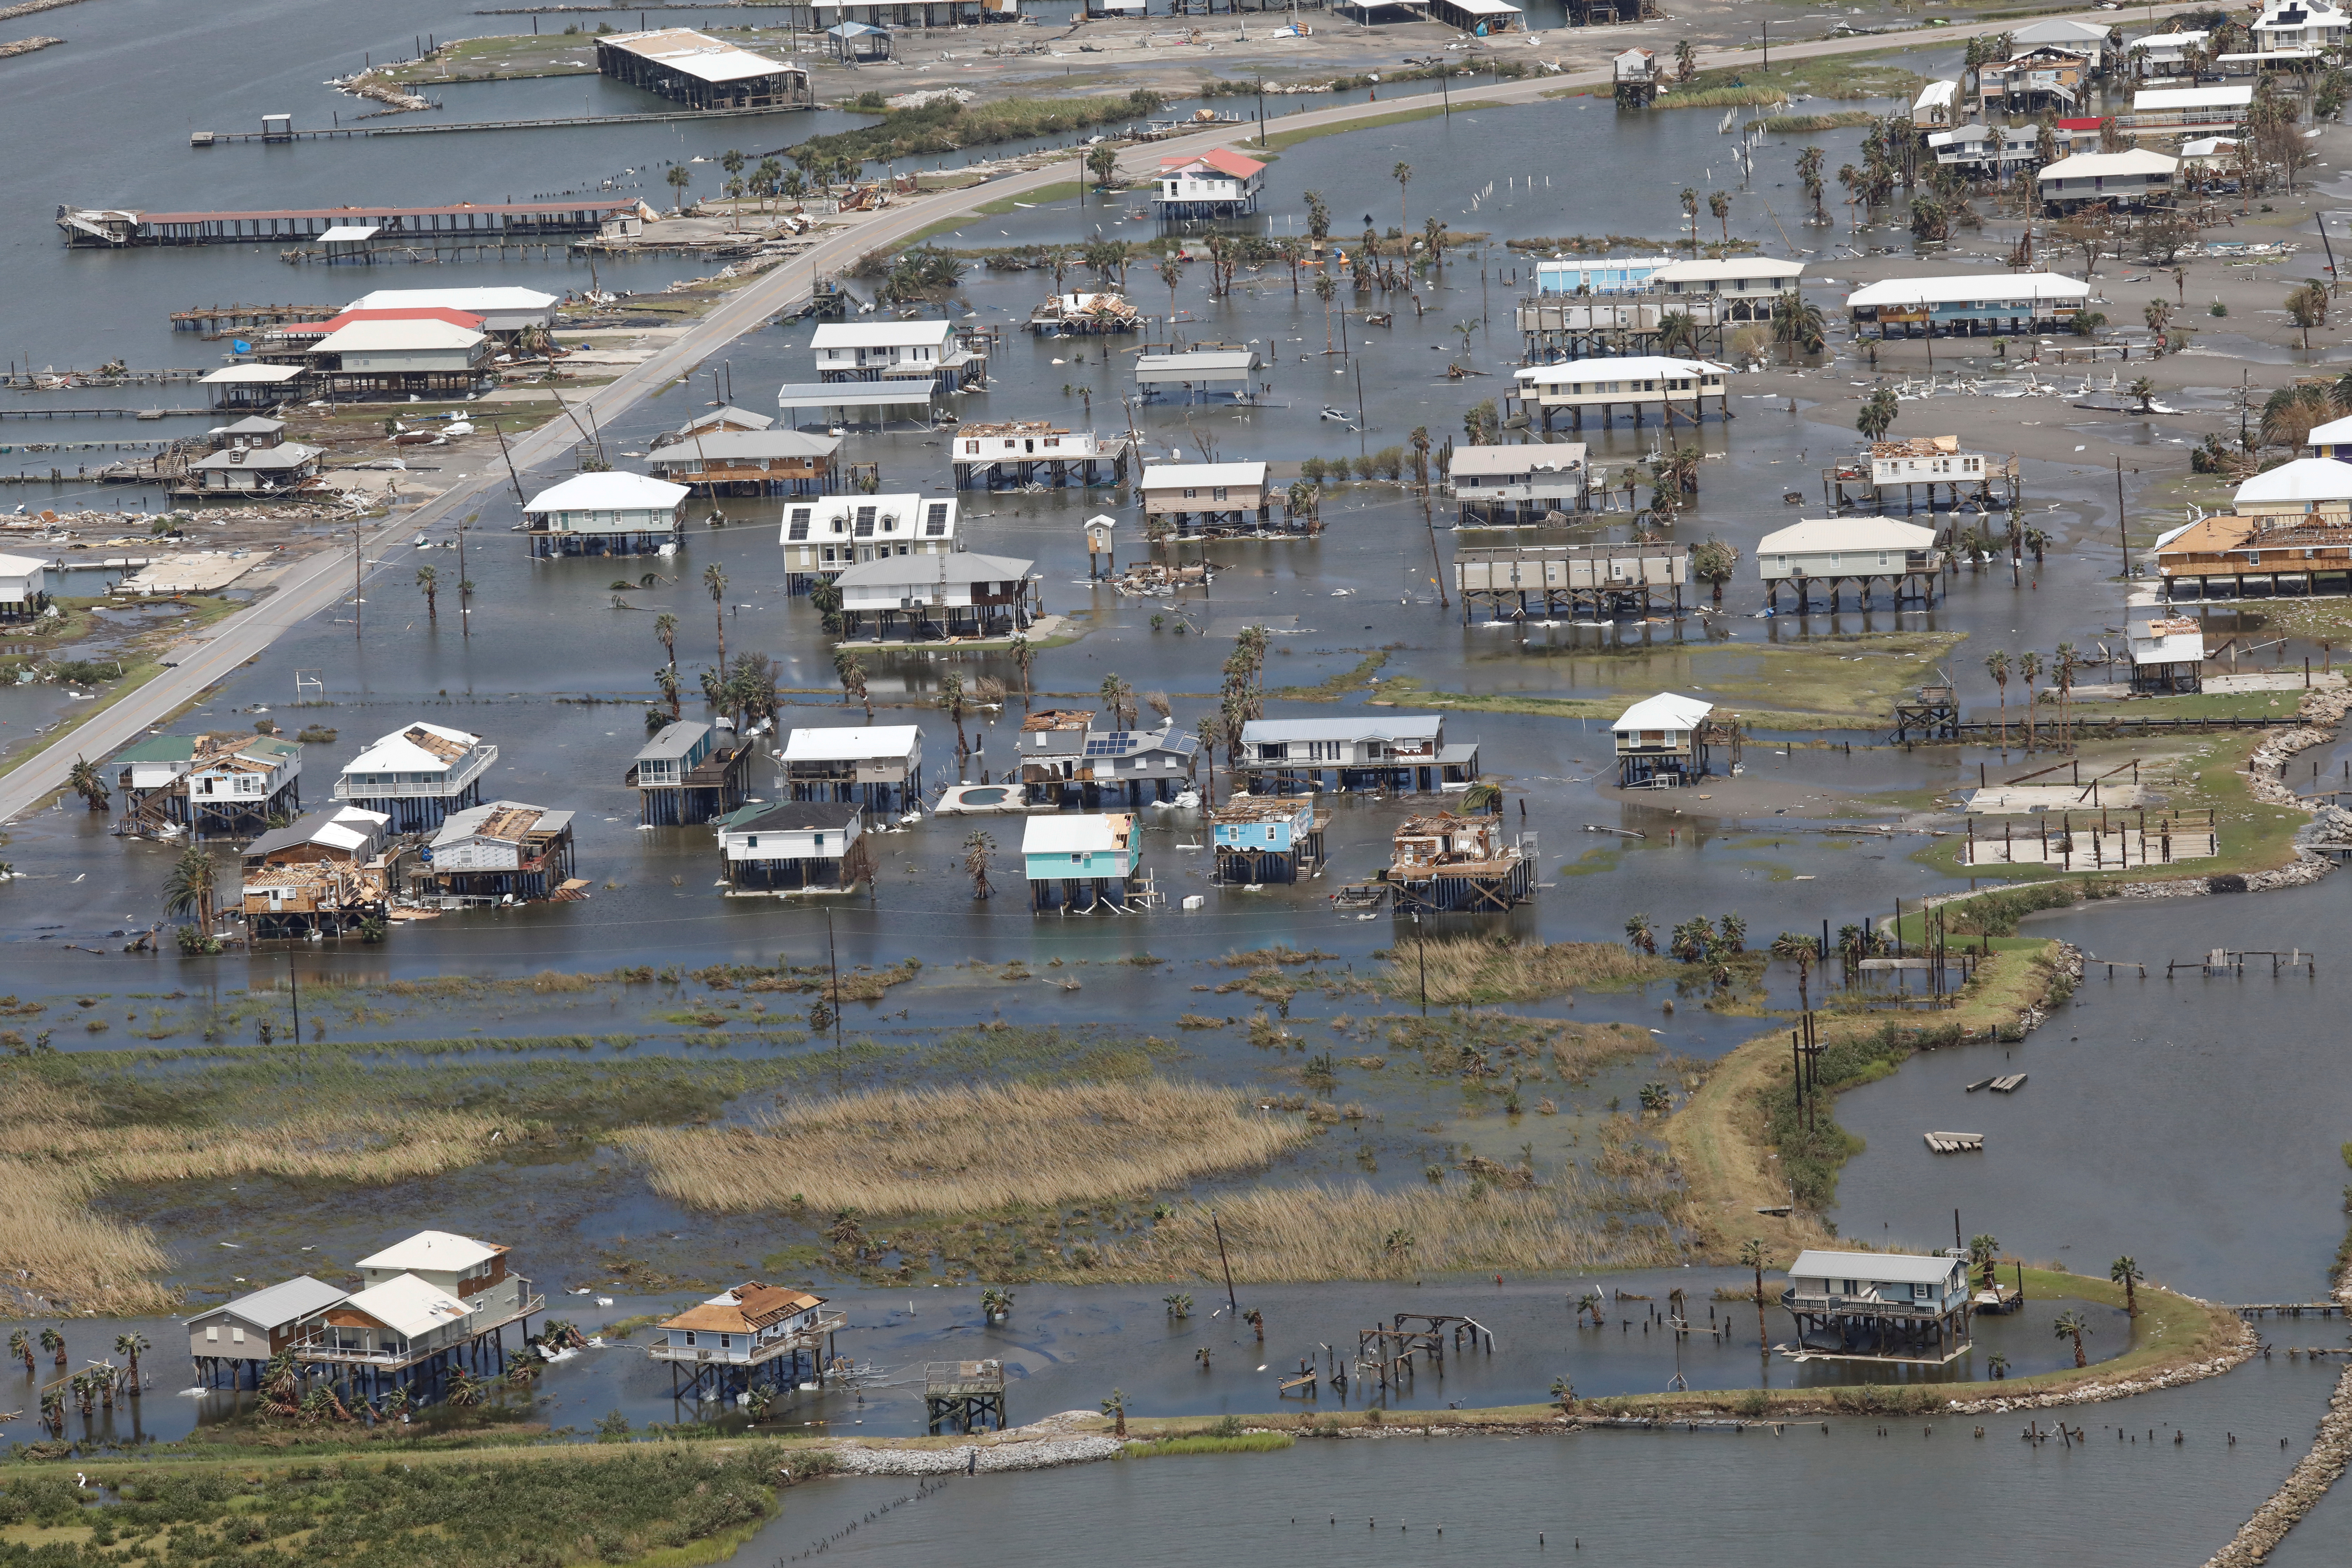 An aerial view shows destroyed houses in a flooded area after Hurricane Ida made landfall in Louisiana, in Grand Isle, Louisiana, U.S. August 31, 2021. REUTERS/Marco Bello